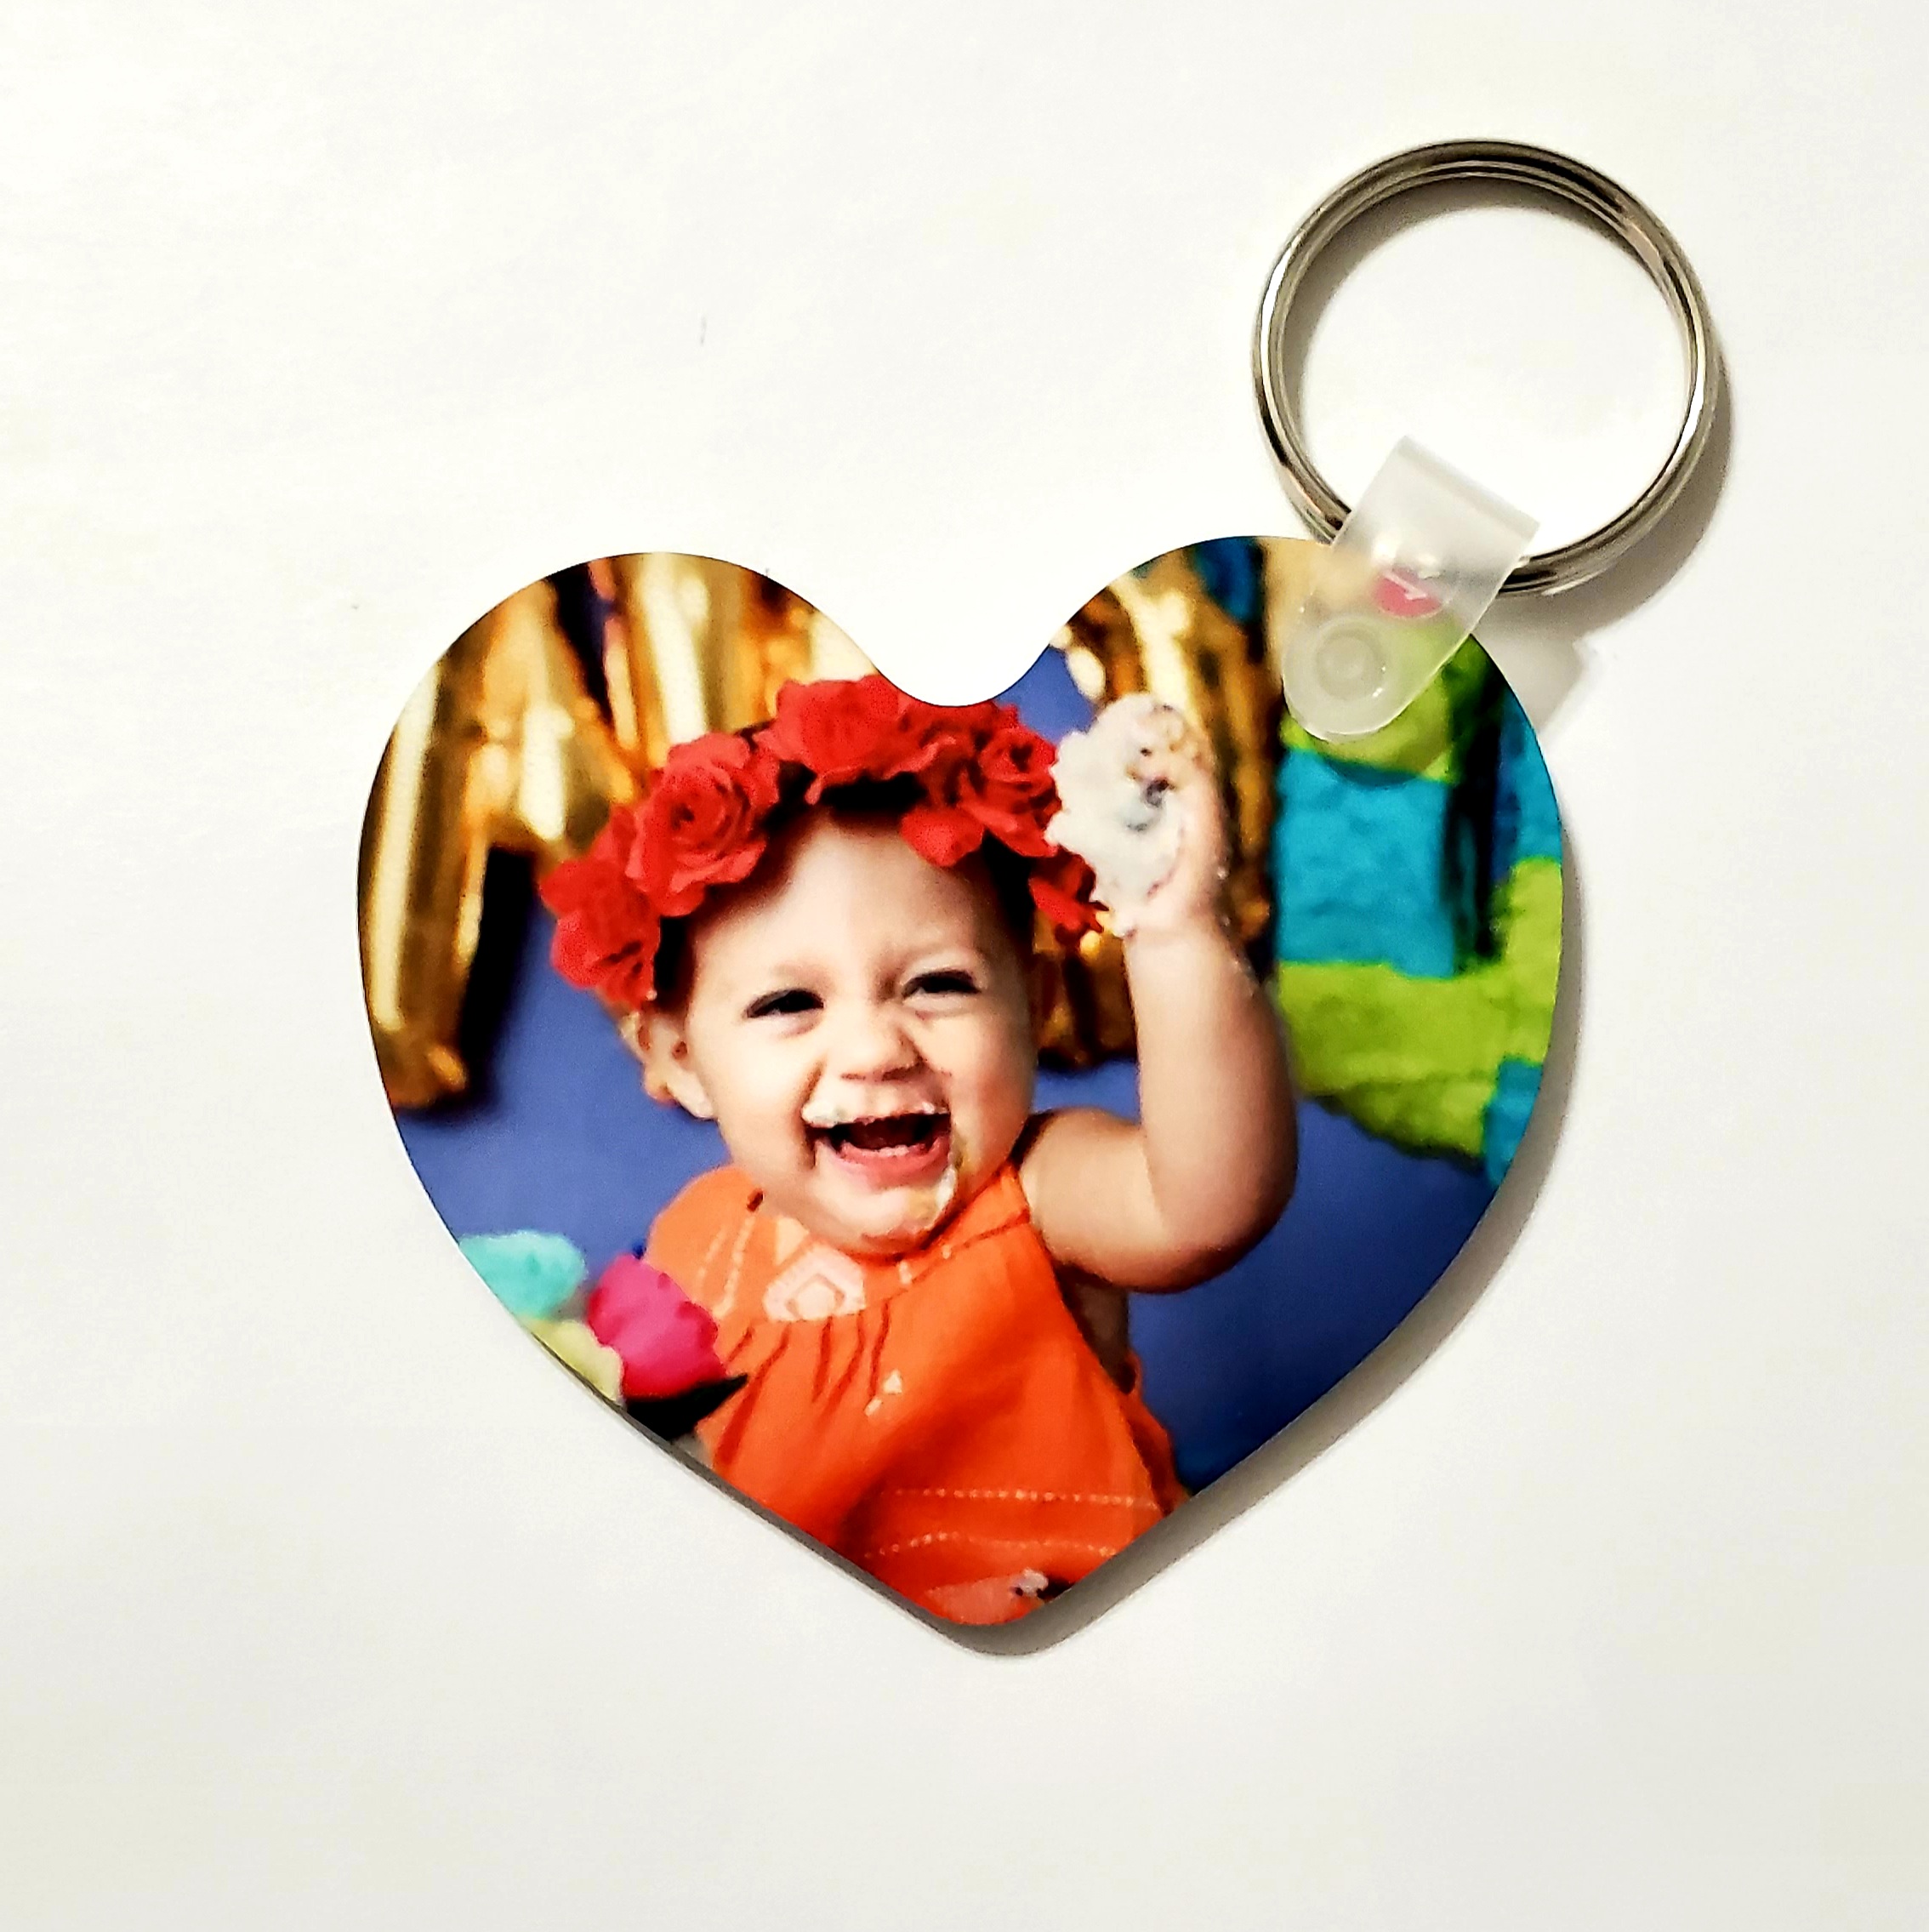 Heart Key Chain made with sublimation printing